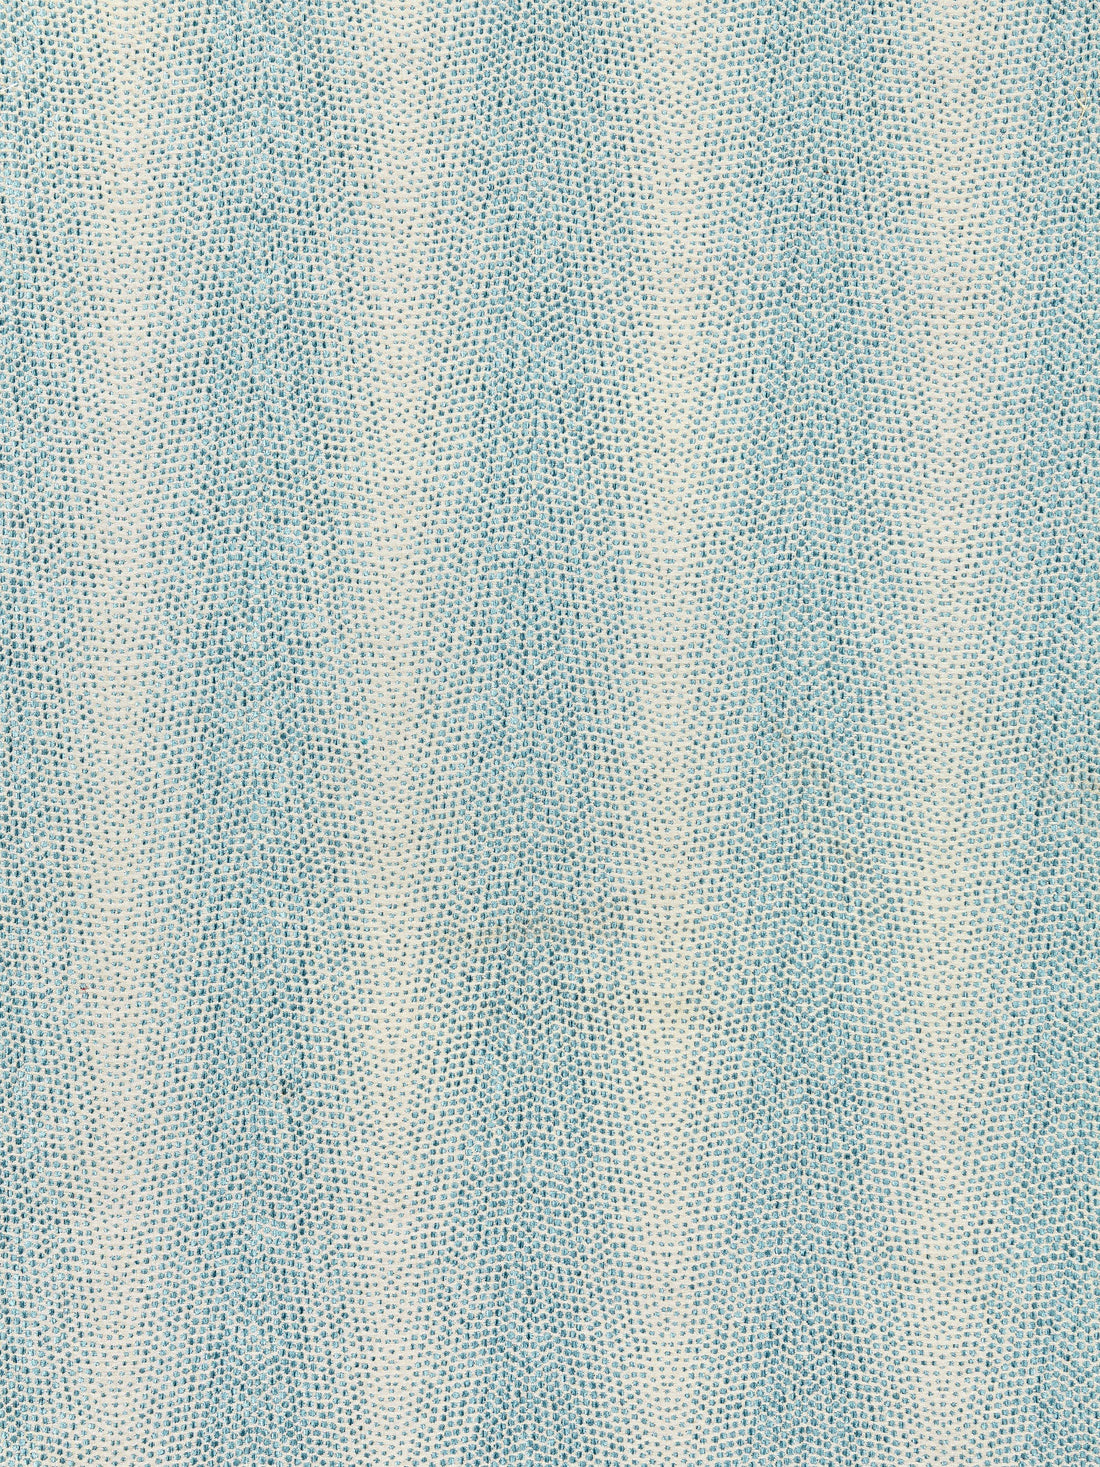 Despres Weave fabric in mineral color - pattern number SC 000227144 - by Scalamandre in the Scalamandre Fabrics Book 1 collection